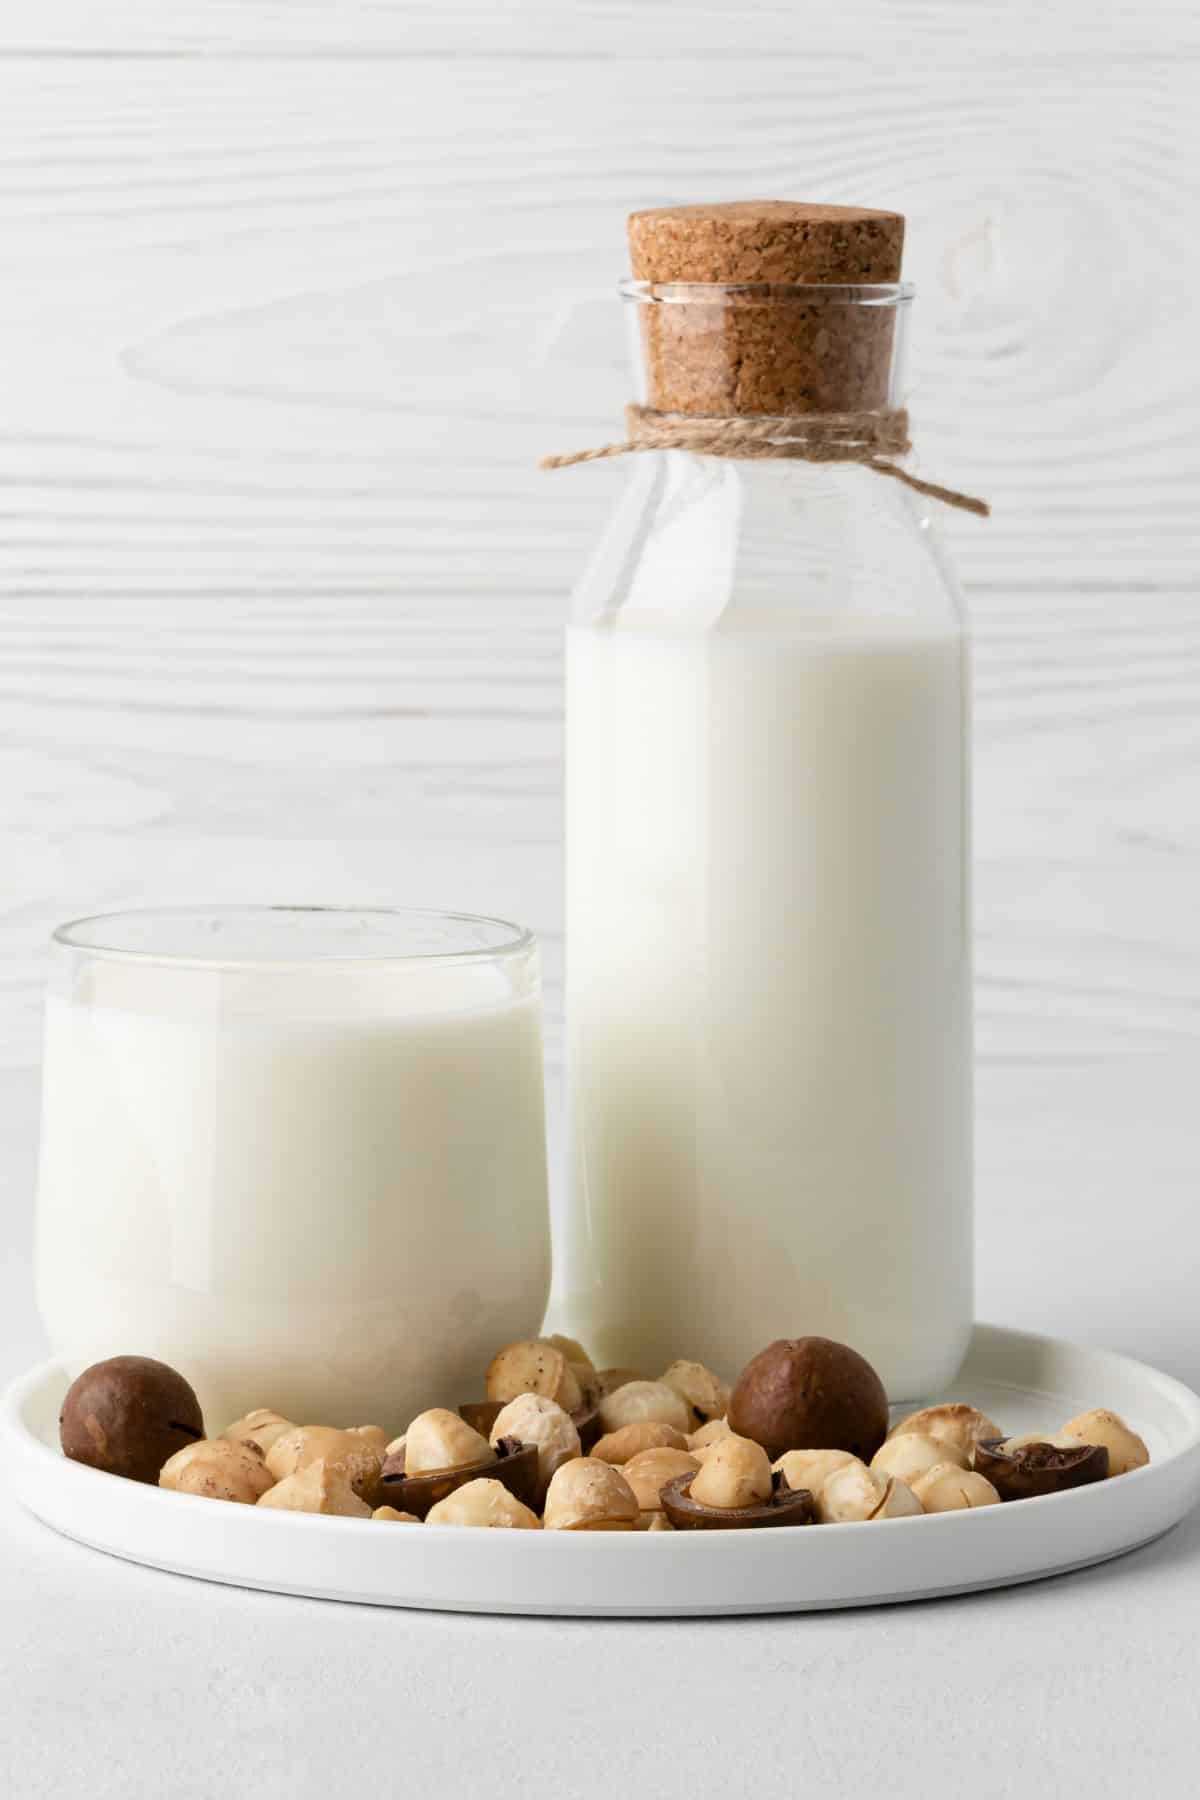 macadamia milk in a jar and glass on a tray filled with macadamia nuts.